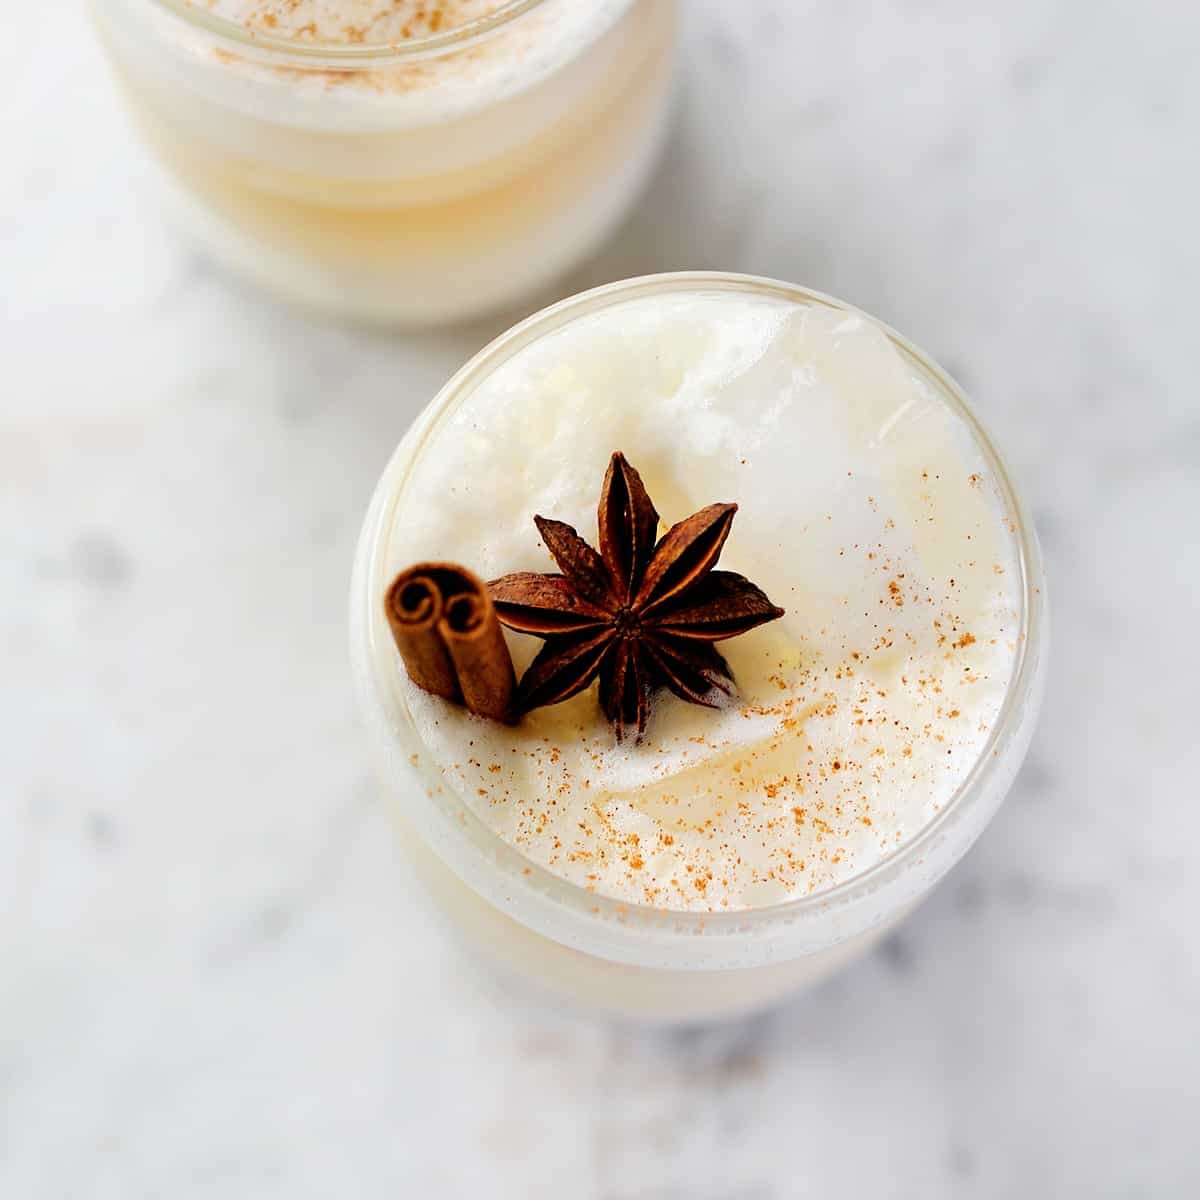 Spiced Chai Latte - Homemade chai mix for hot & iced lattes